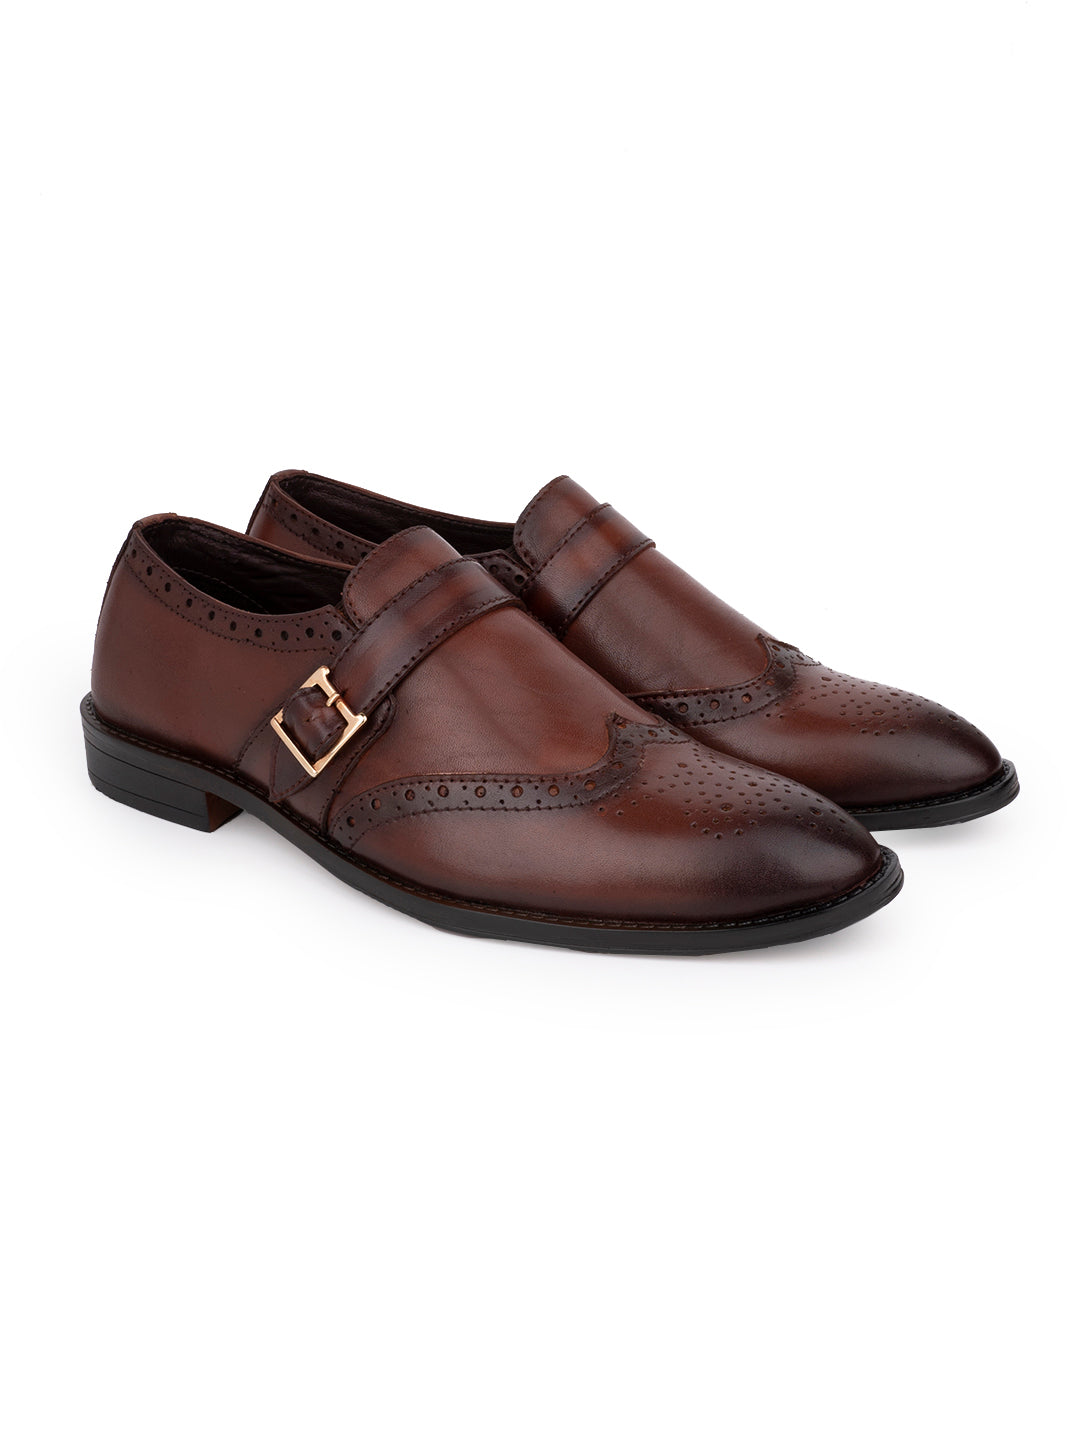 Men Brown Perforated Monk Formal Shoes